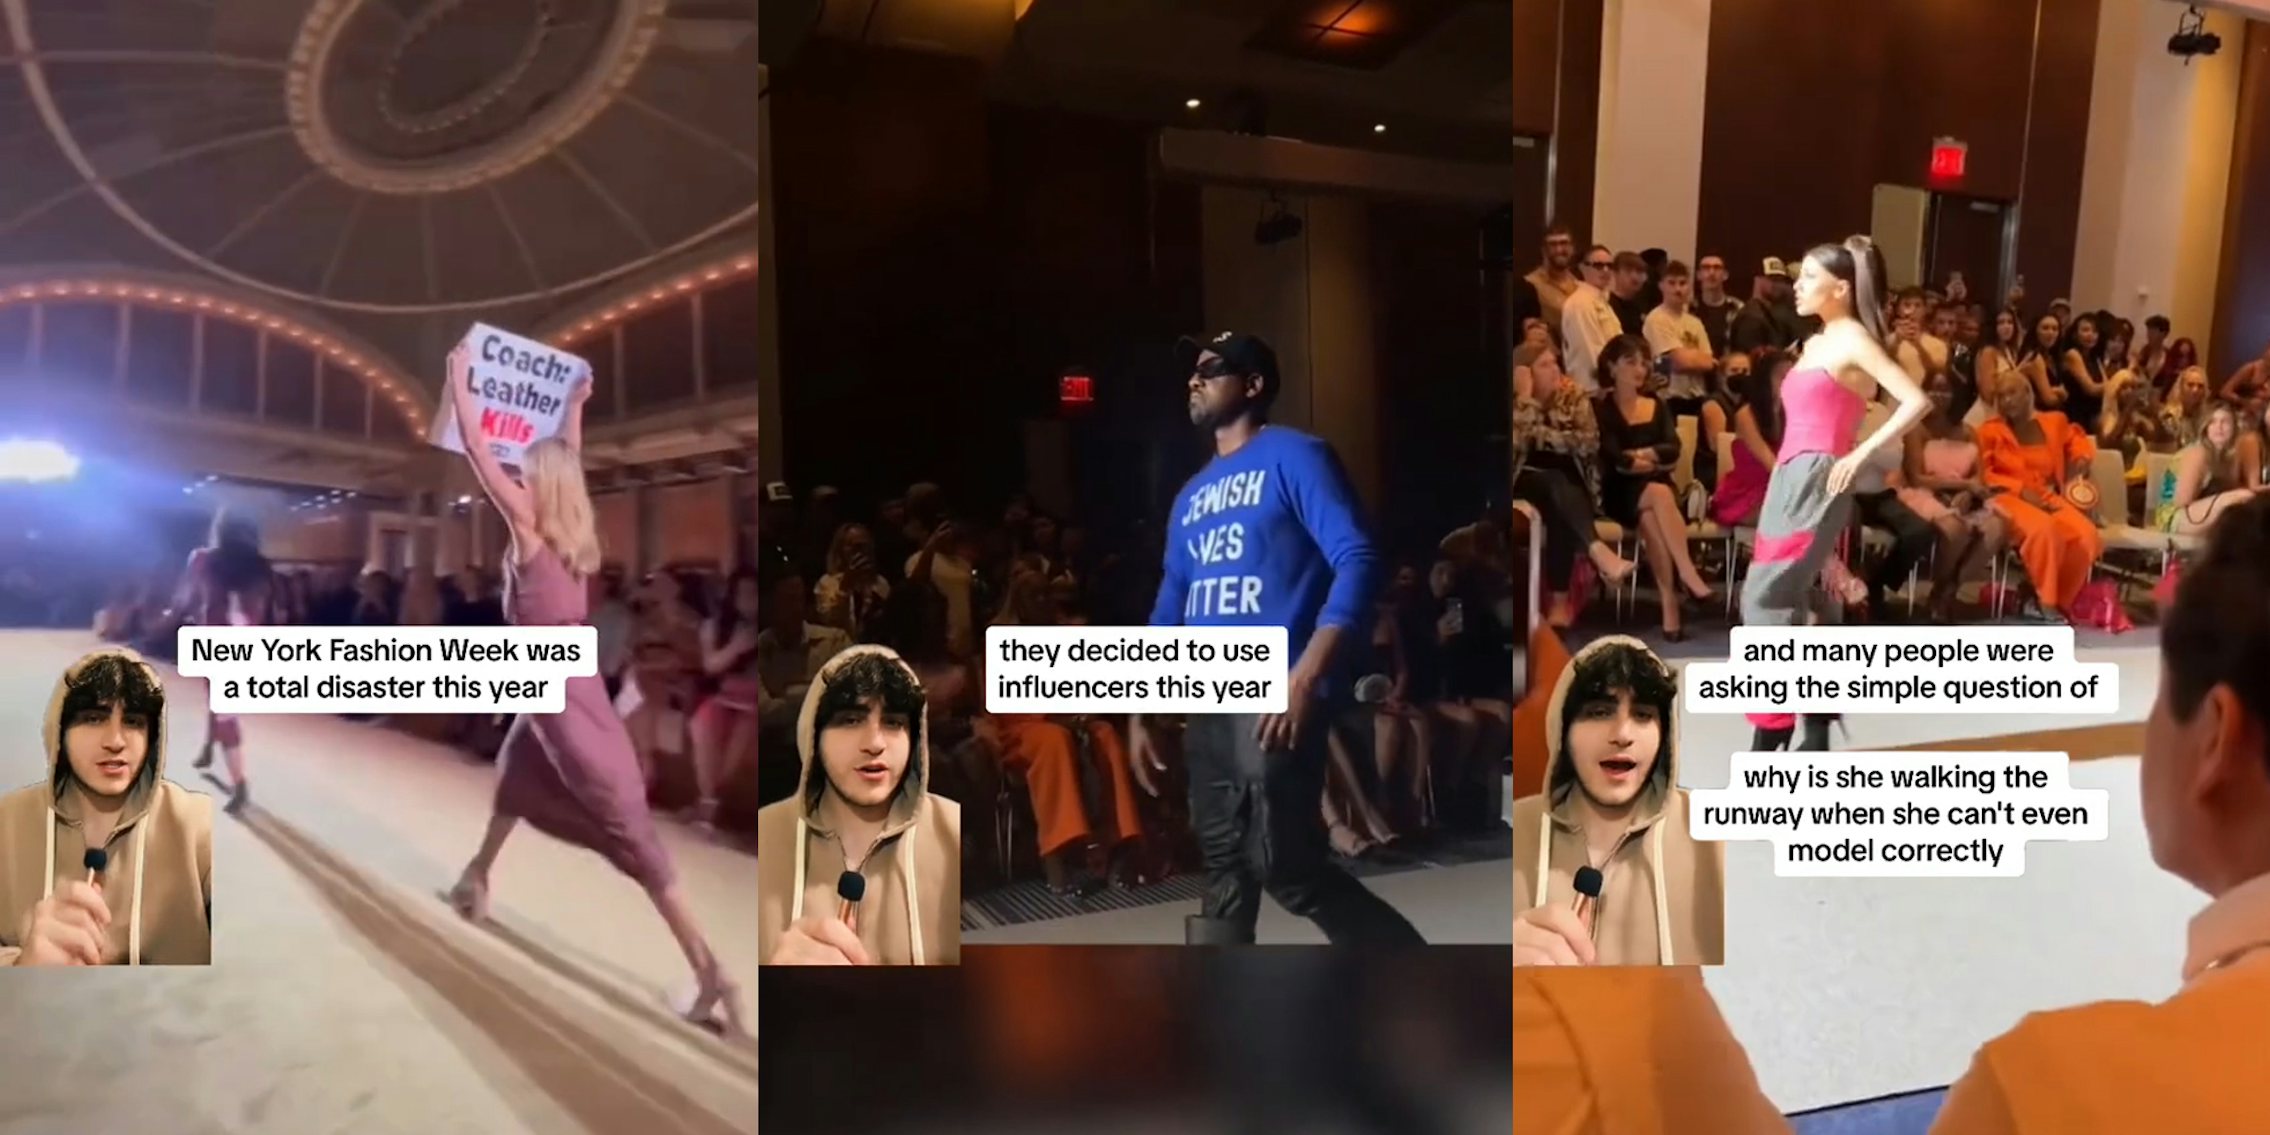 man greenscreen TikTok over New York Fashion Week 2023 video with caption 'New York Fashion Week was a total disaster this year' (l) man greenscreen TikTok over New York Fashion Week 2023 video with caption 'they decided to use influencers this year' (c) man greenscreen TikTok over New York Fashion Week 2023 video with caption 'and many people were asking the simple question of why is she alking the runway when she can't even model correctly' (r)